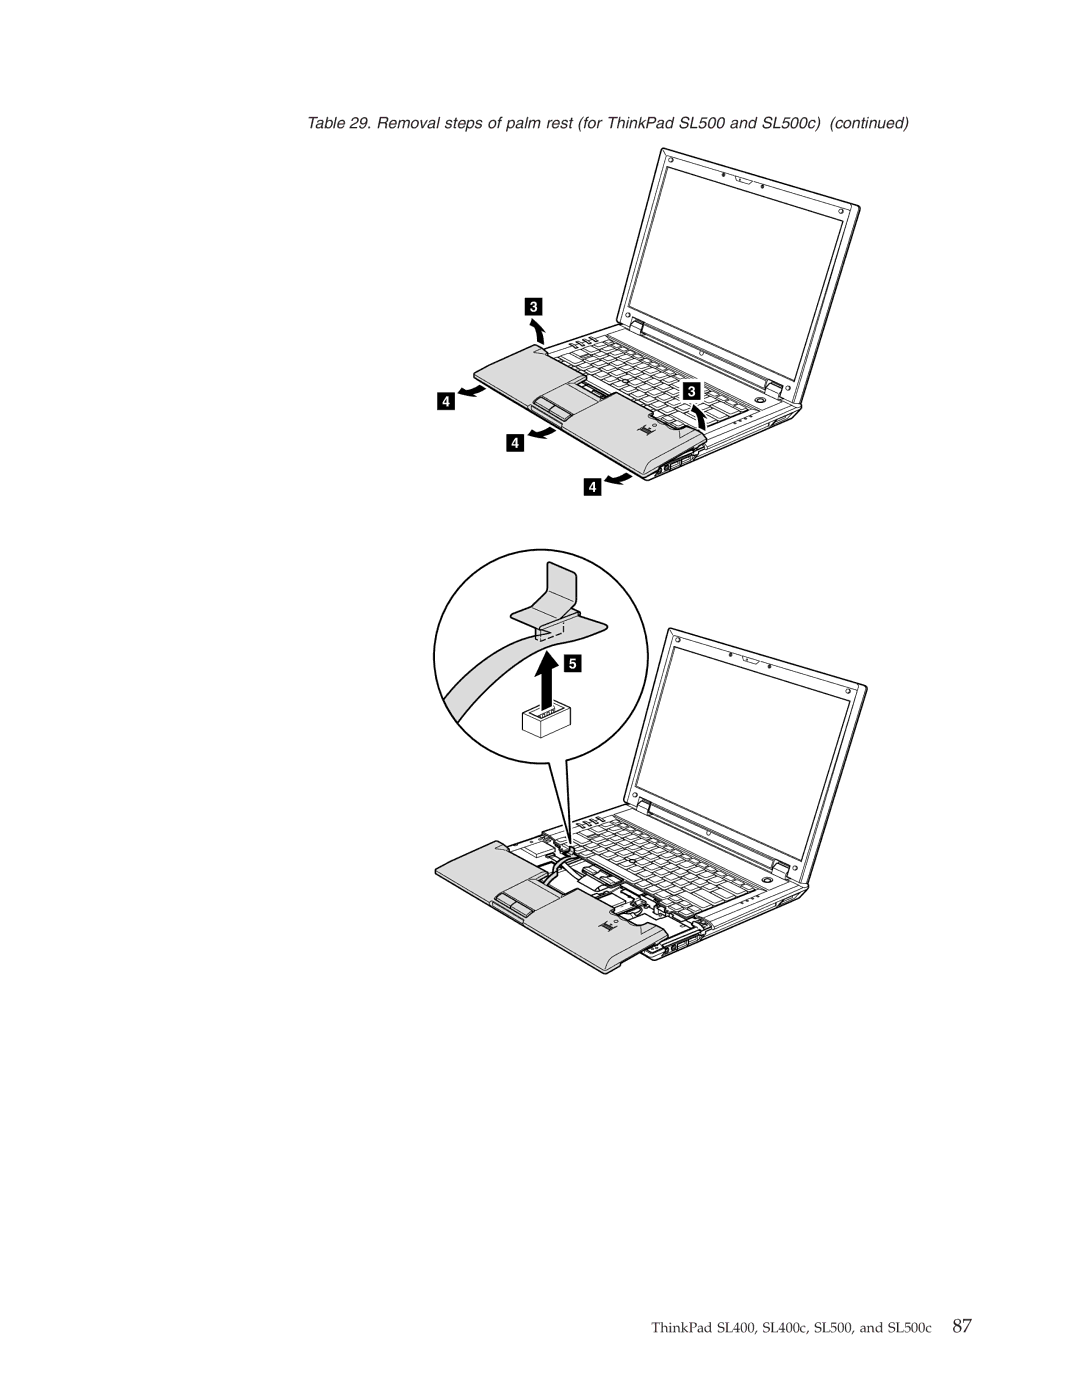 Lenovo SL400c manual Removal steps of palm rest for ThinkPad SL500 and SL500c 